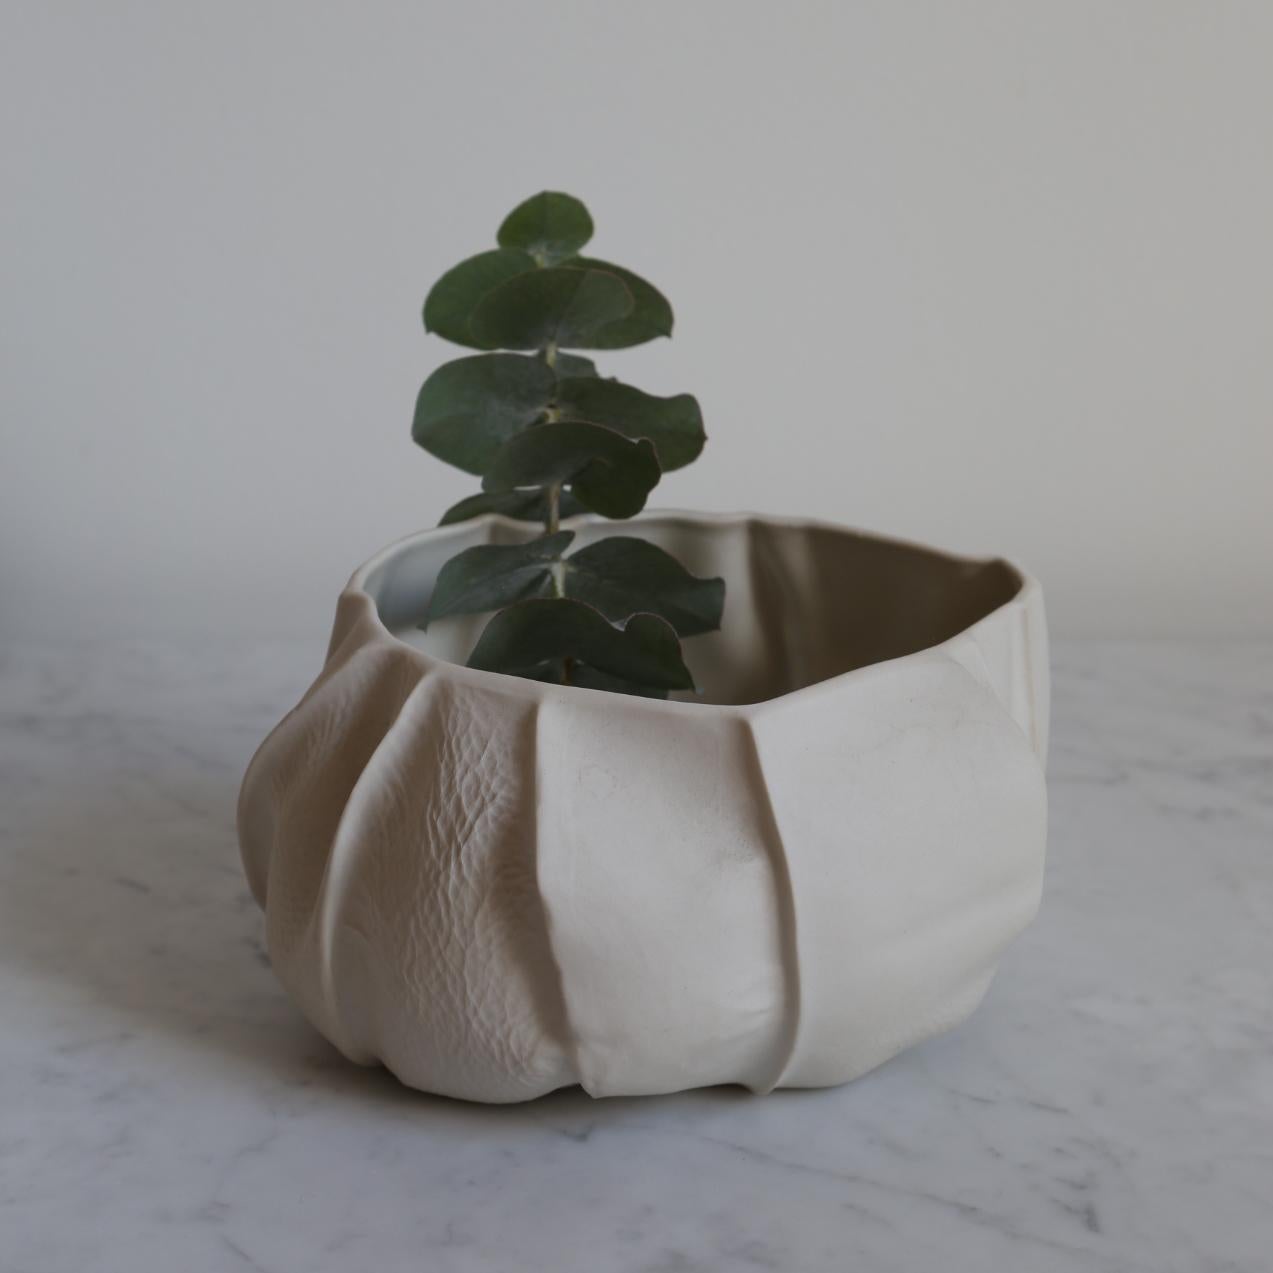 One of a Kind Kawa Bowl by Luft Tanaka, Ceramic, Porcelain, in Stock (amerikanisch)